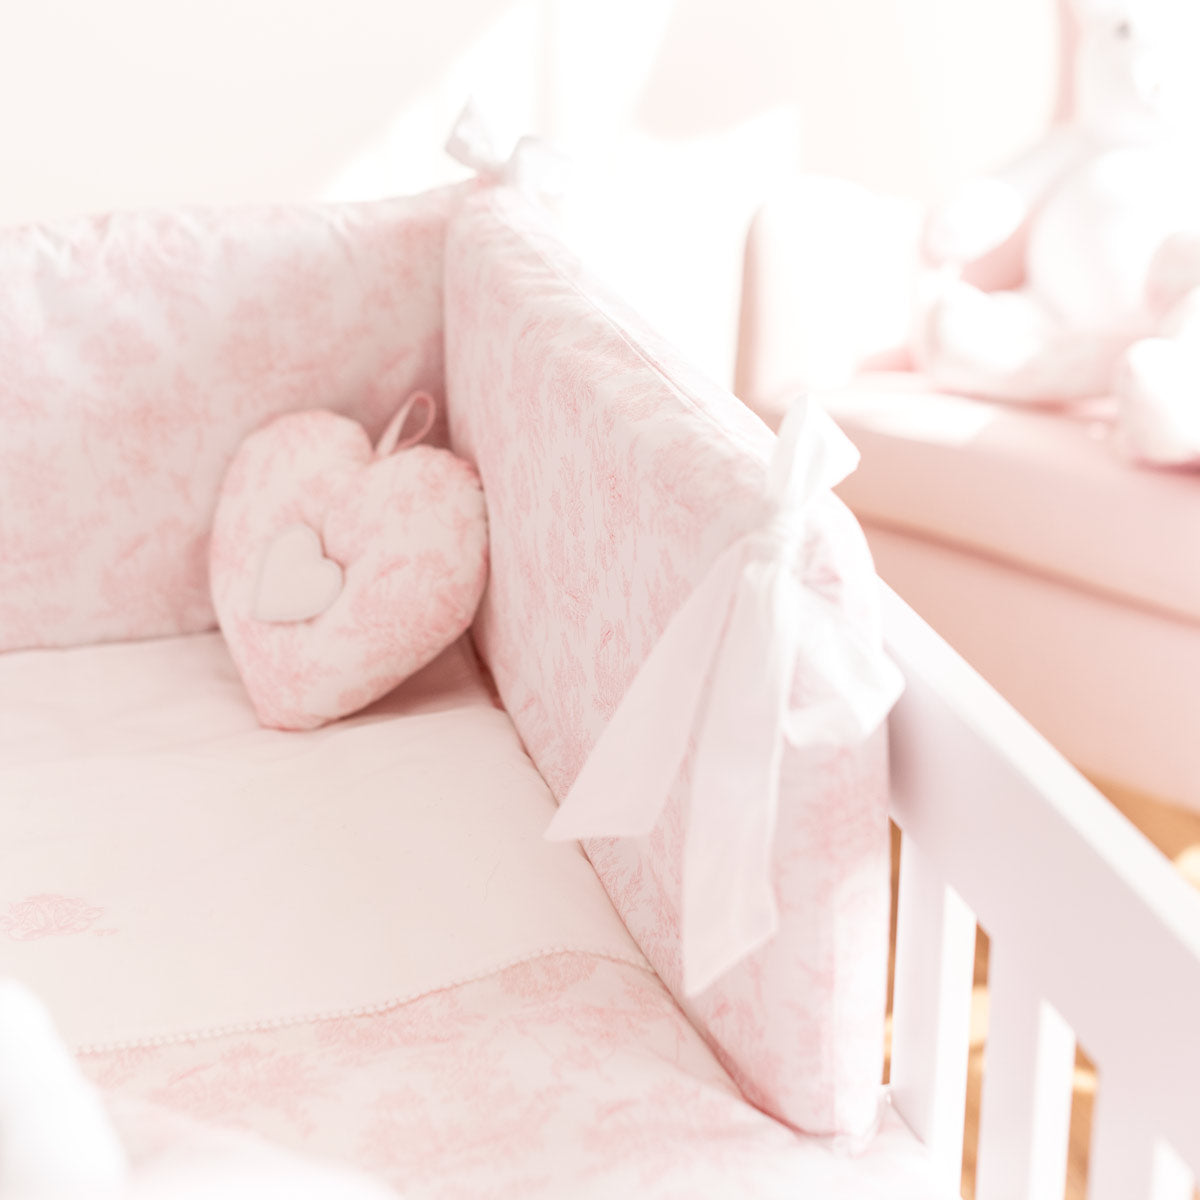 Theophile & Patachou Cot Bed Bumper 70 cm - Sweet Pink